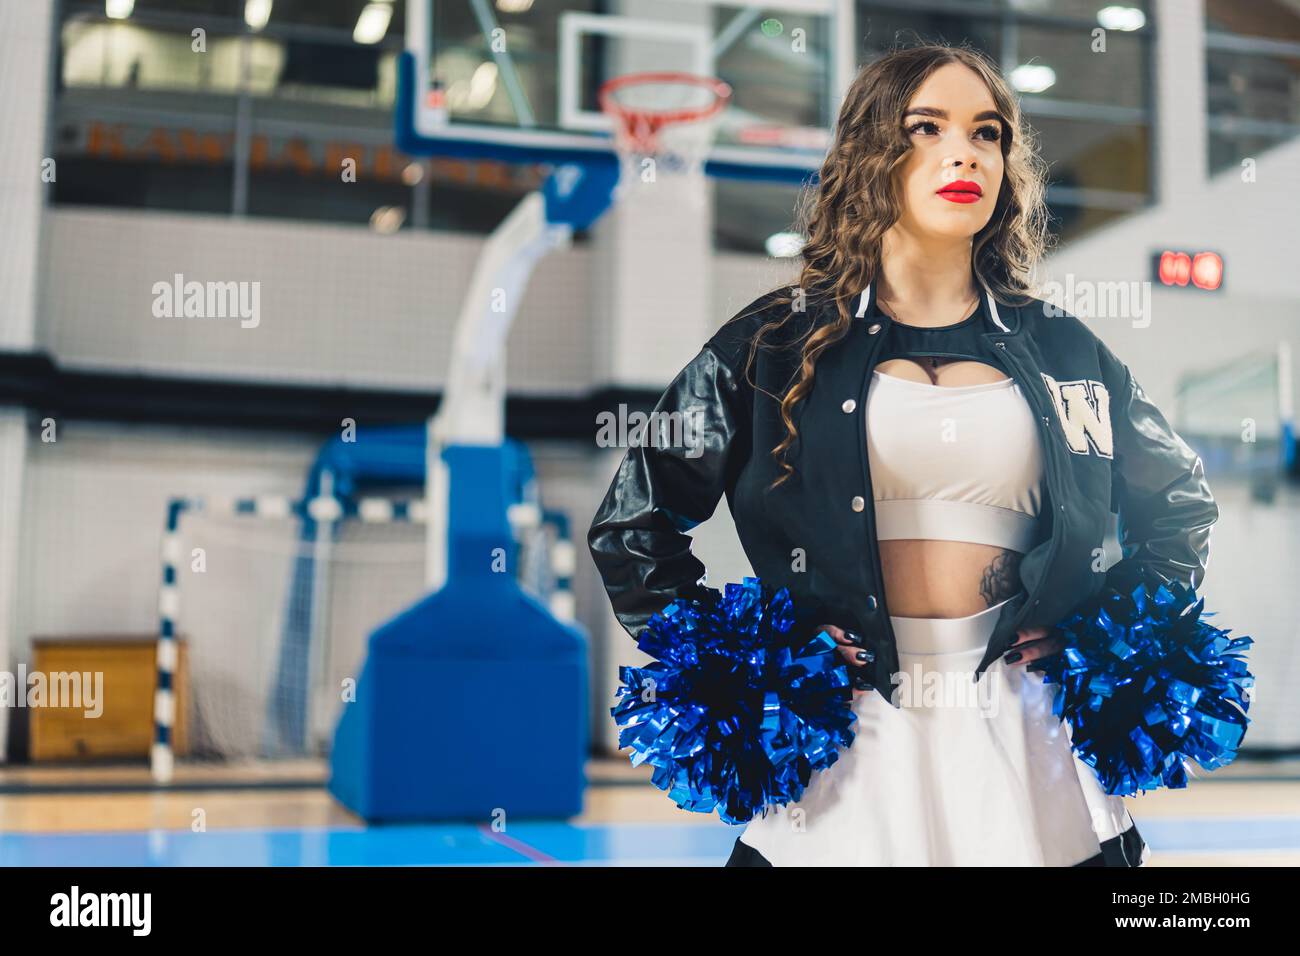 Horizontal shot of cheerleader wearing red lipstick in a jacket posing with blue shiny pom-poms. Basketball court blurred in the background. High quality photo Stock Photo